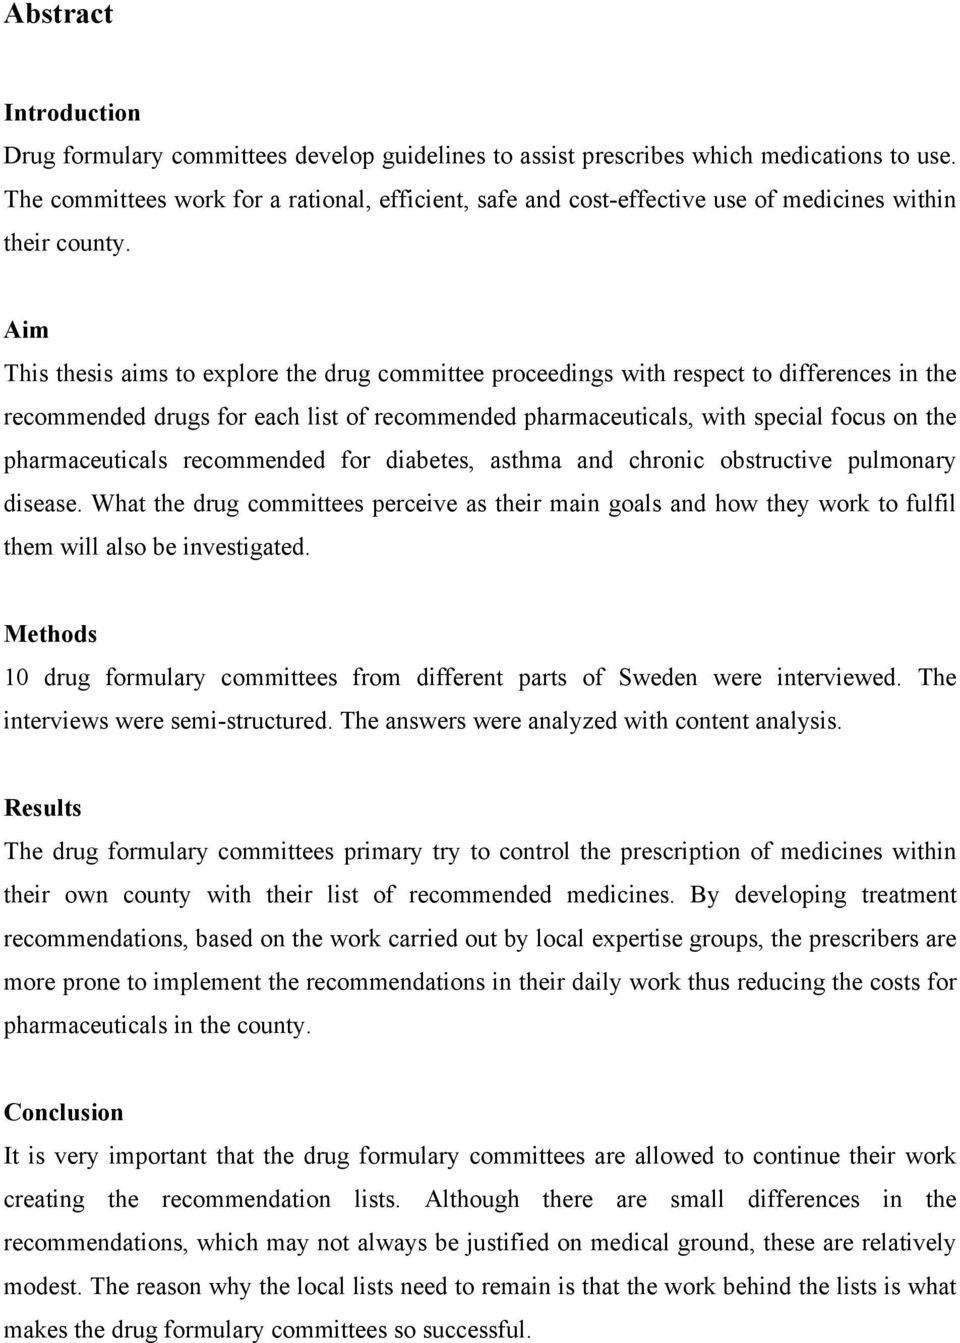 Aim This thesis aims to explore the drug committee proceedings with respect to differences in the recommended drugs for each list of recommended pharmaceuticals, with special focus on the